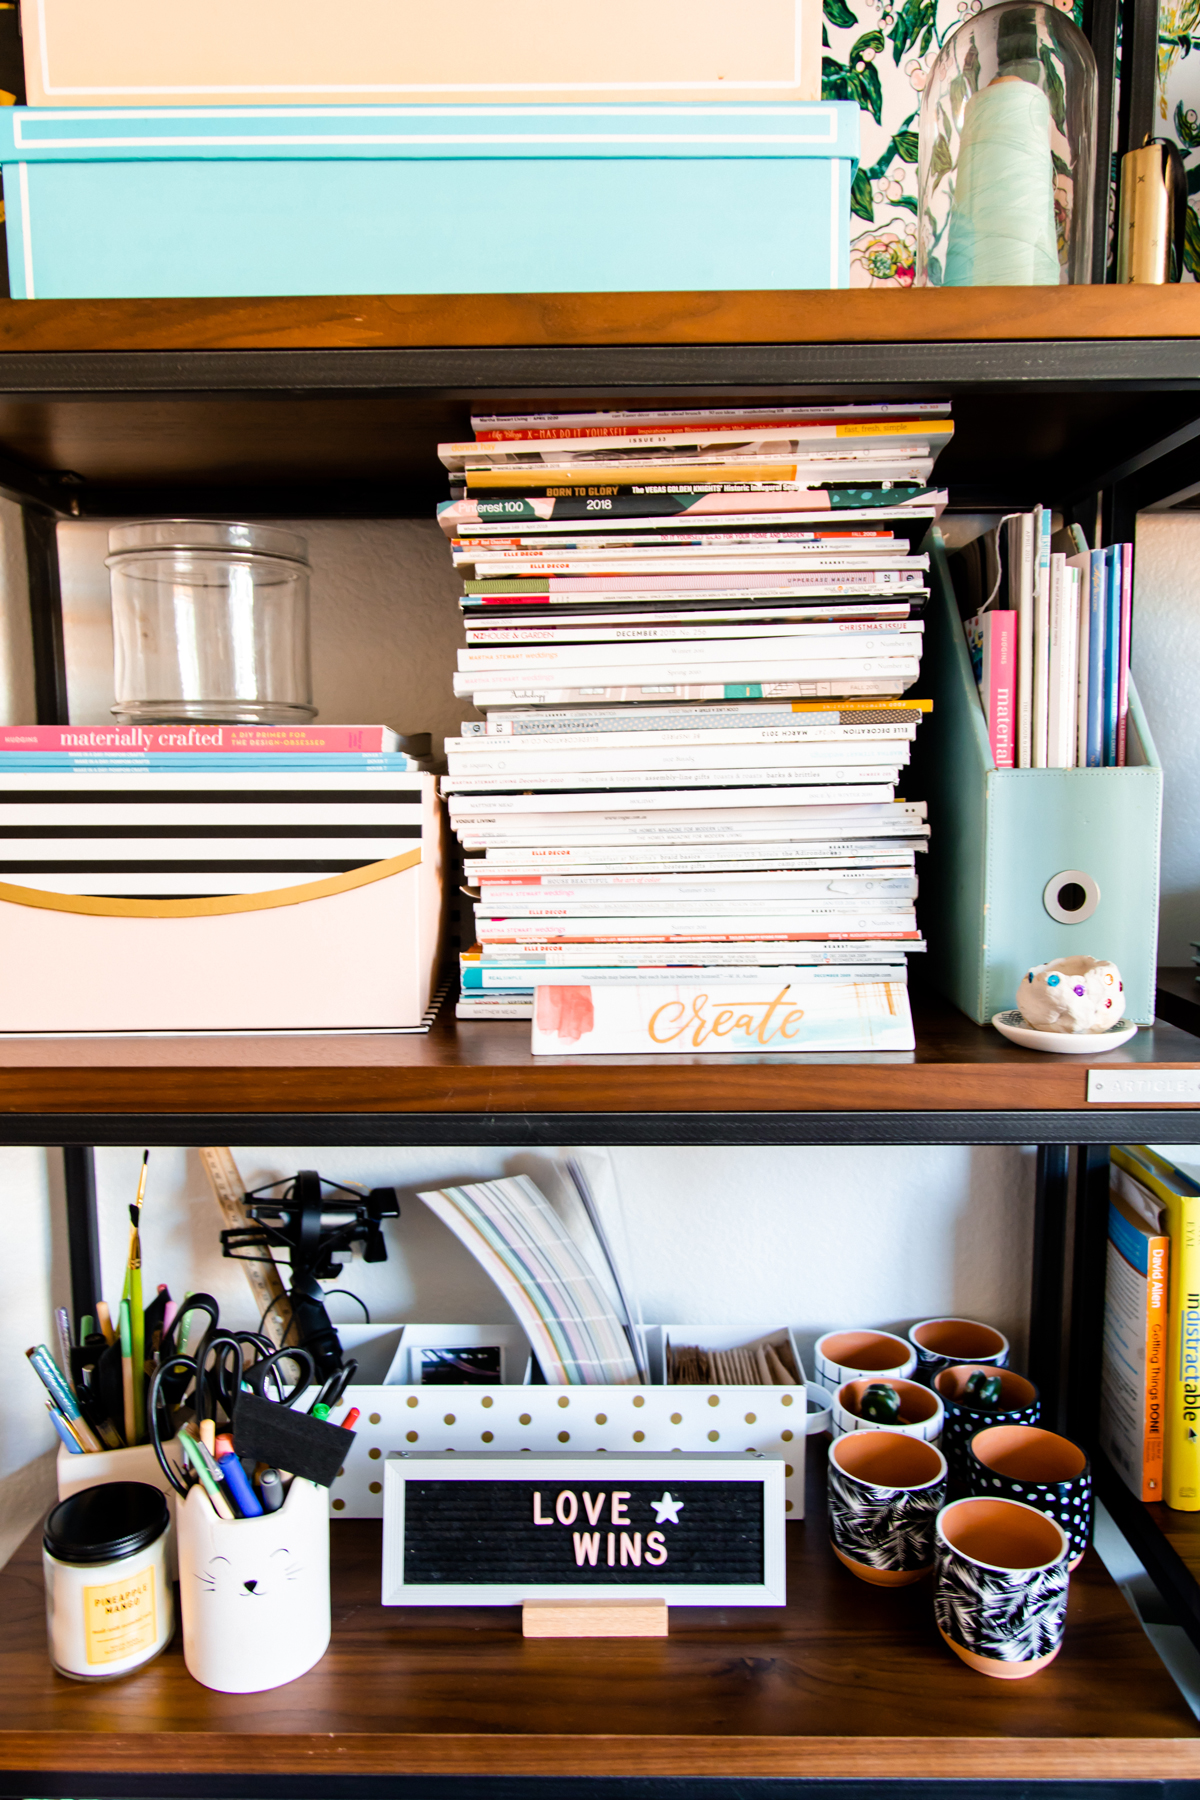 How to style a home office bookshelf